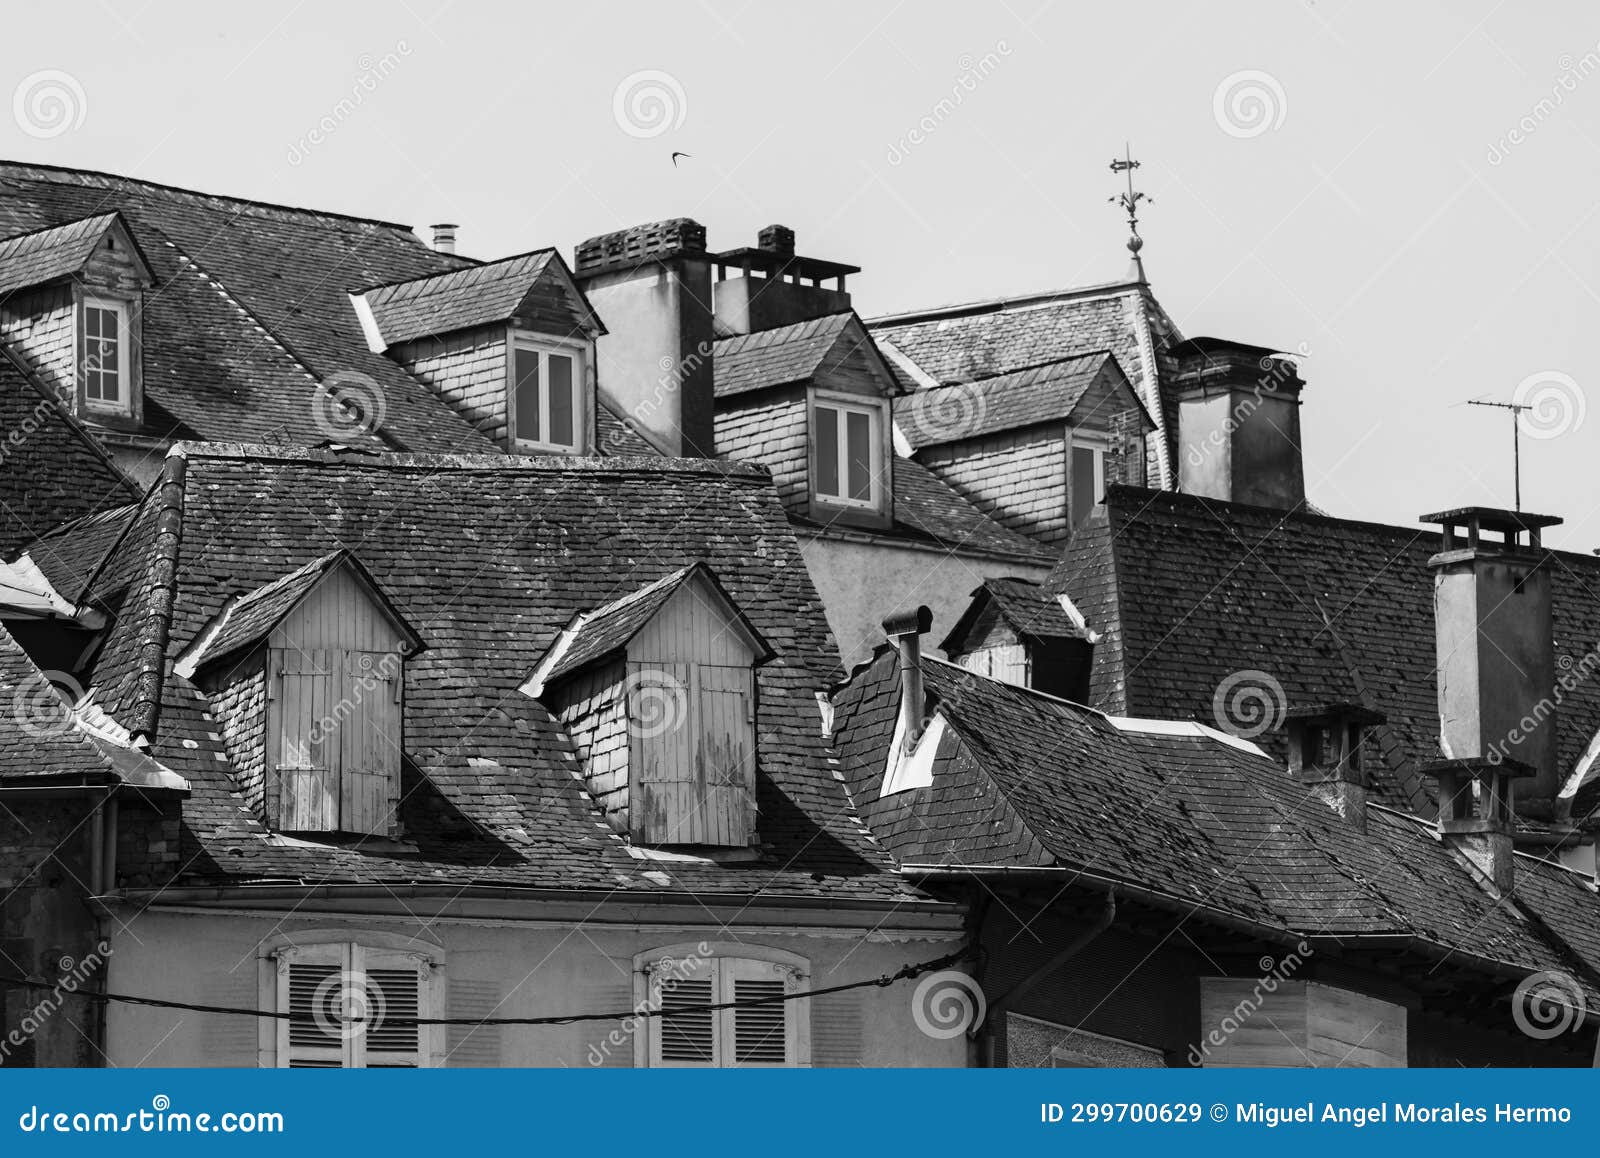 roofs with dormers and chimneys in france